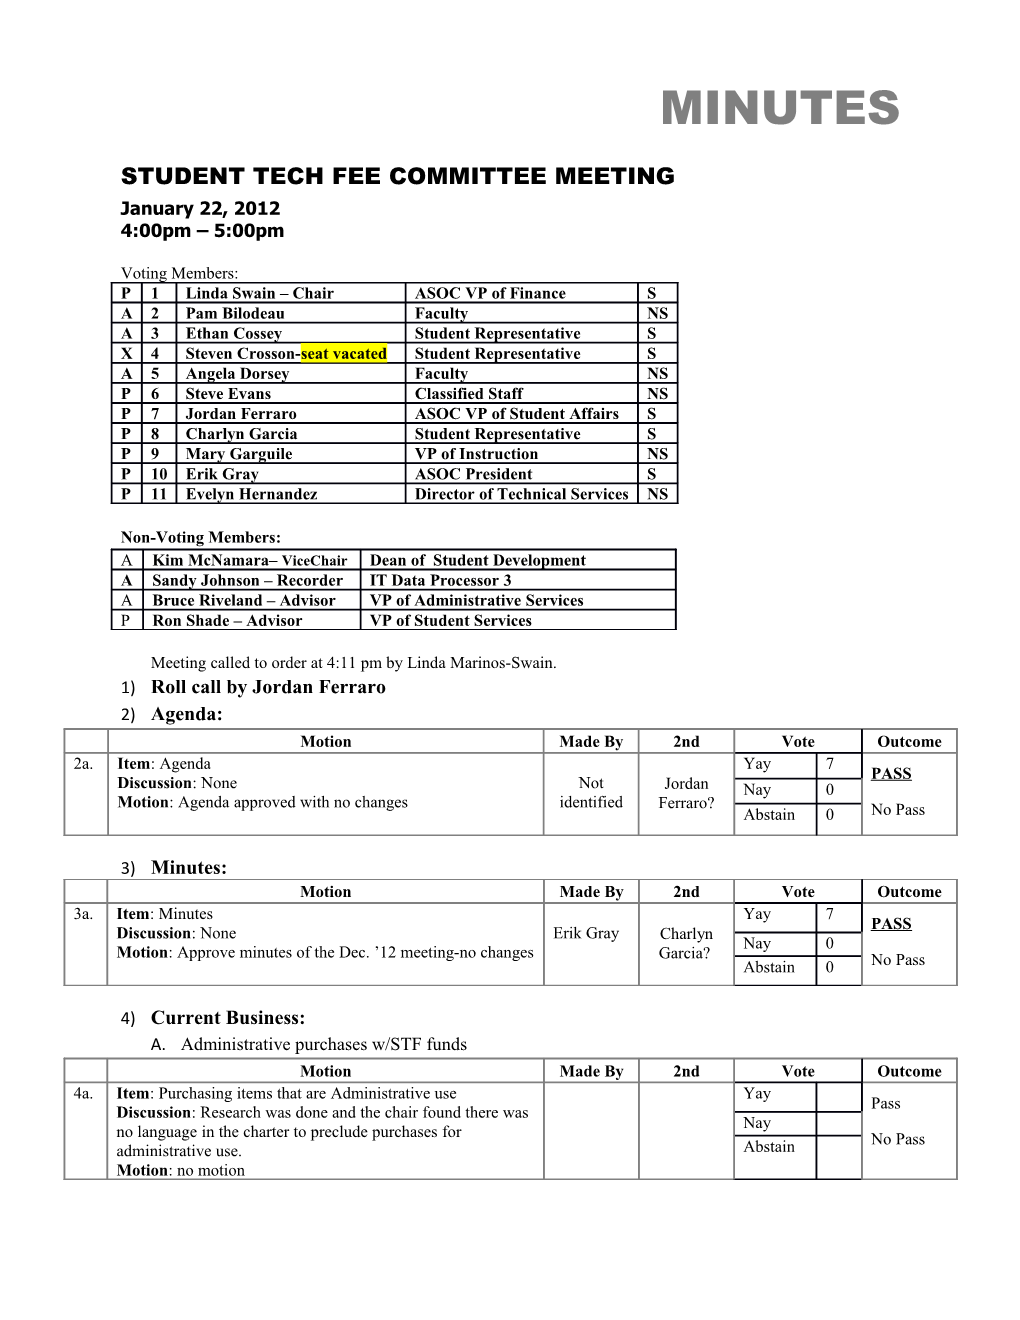 Student Tech Fee Committee Meeting